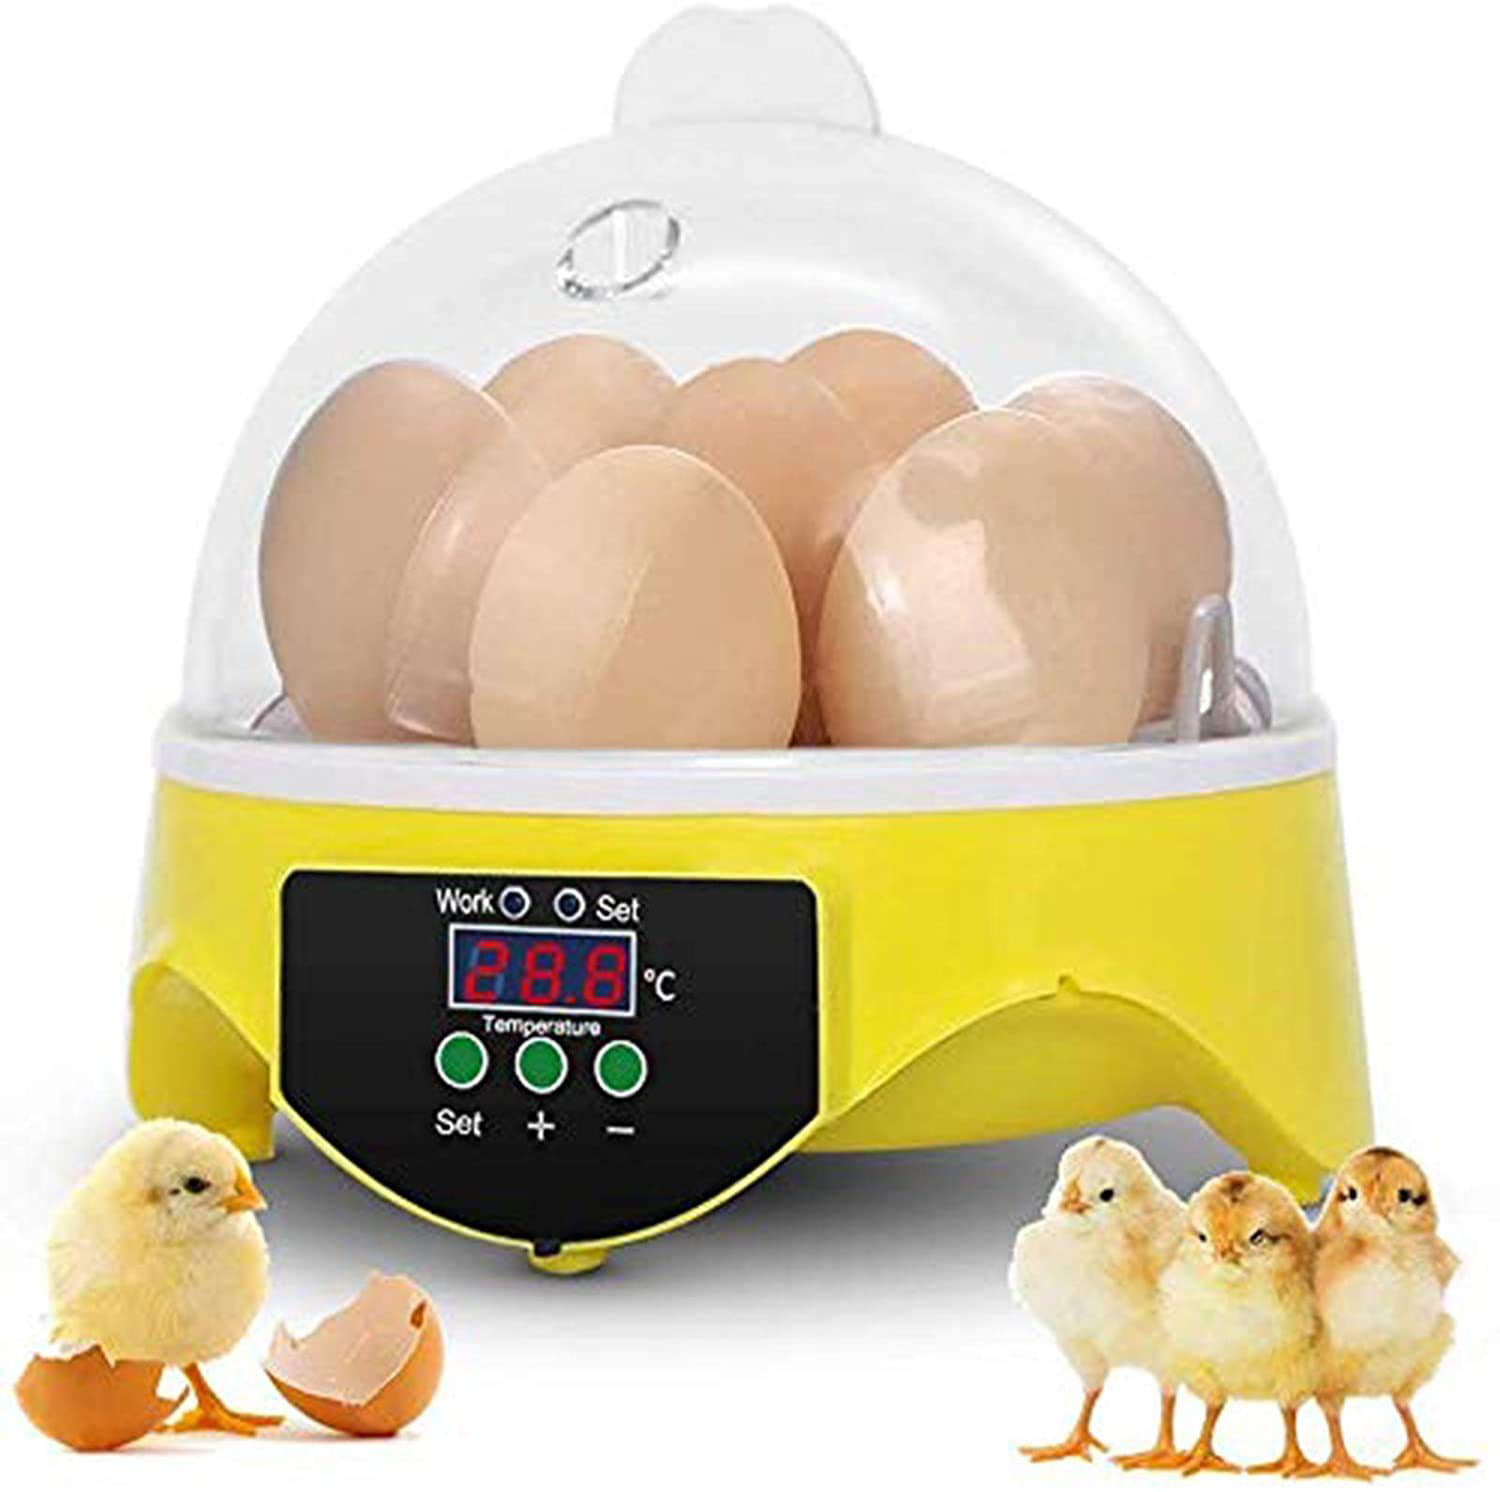 Egg Incubator, Temperature Control Hatching Machine Automatic Incubator for  Chicken Eggs, Poultry Hatcher for Chickens Ducks Goose Birds (7 Eggs) -  Walmart.com